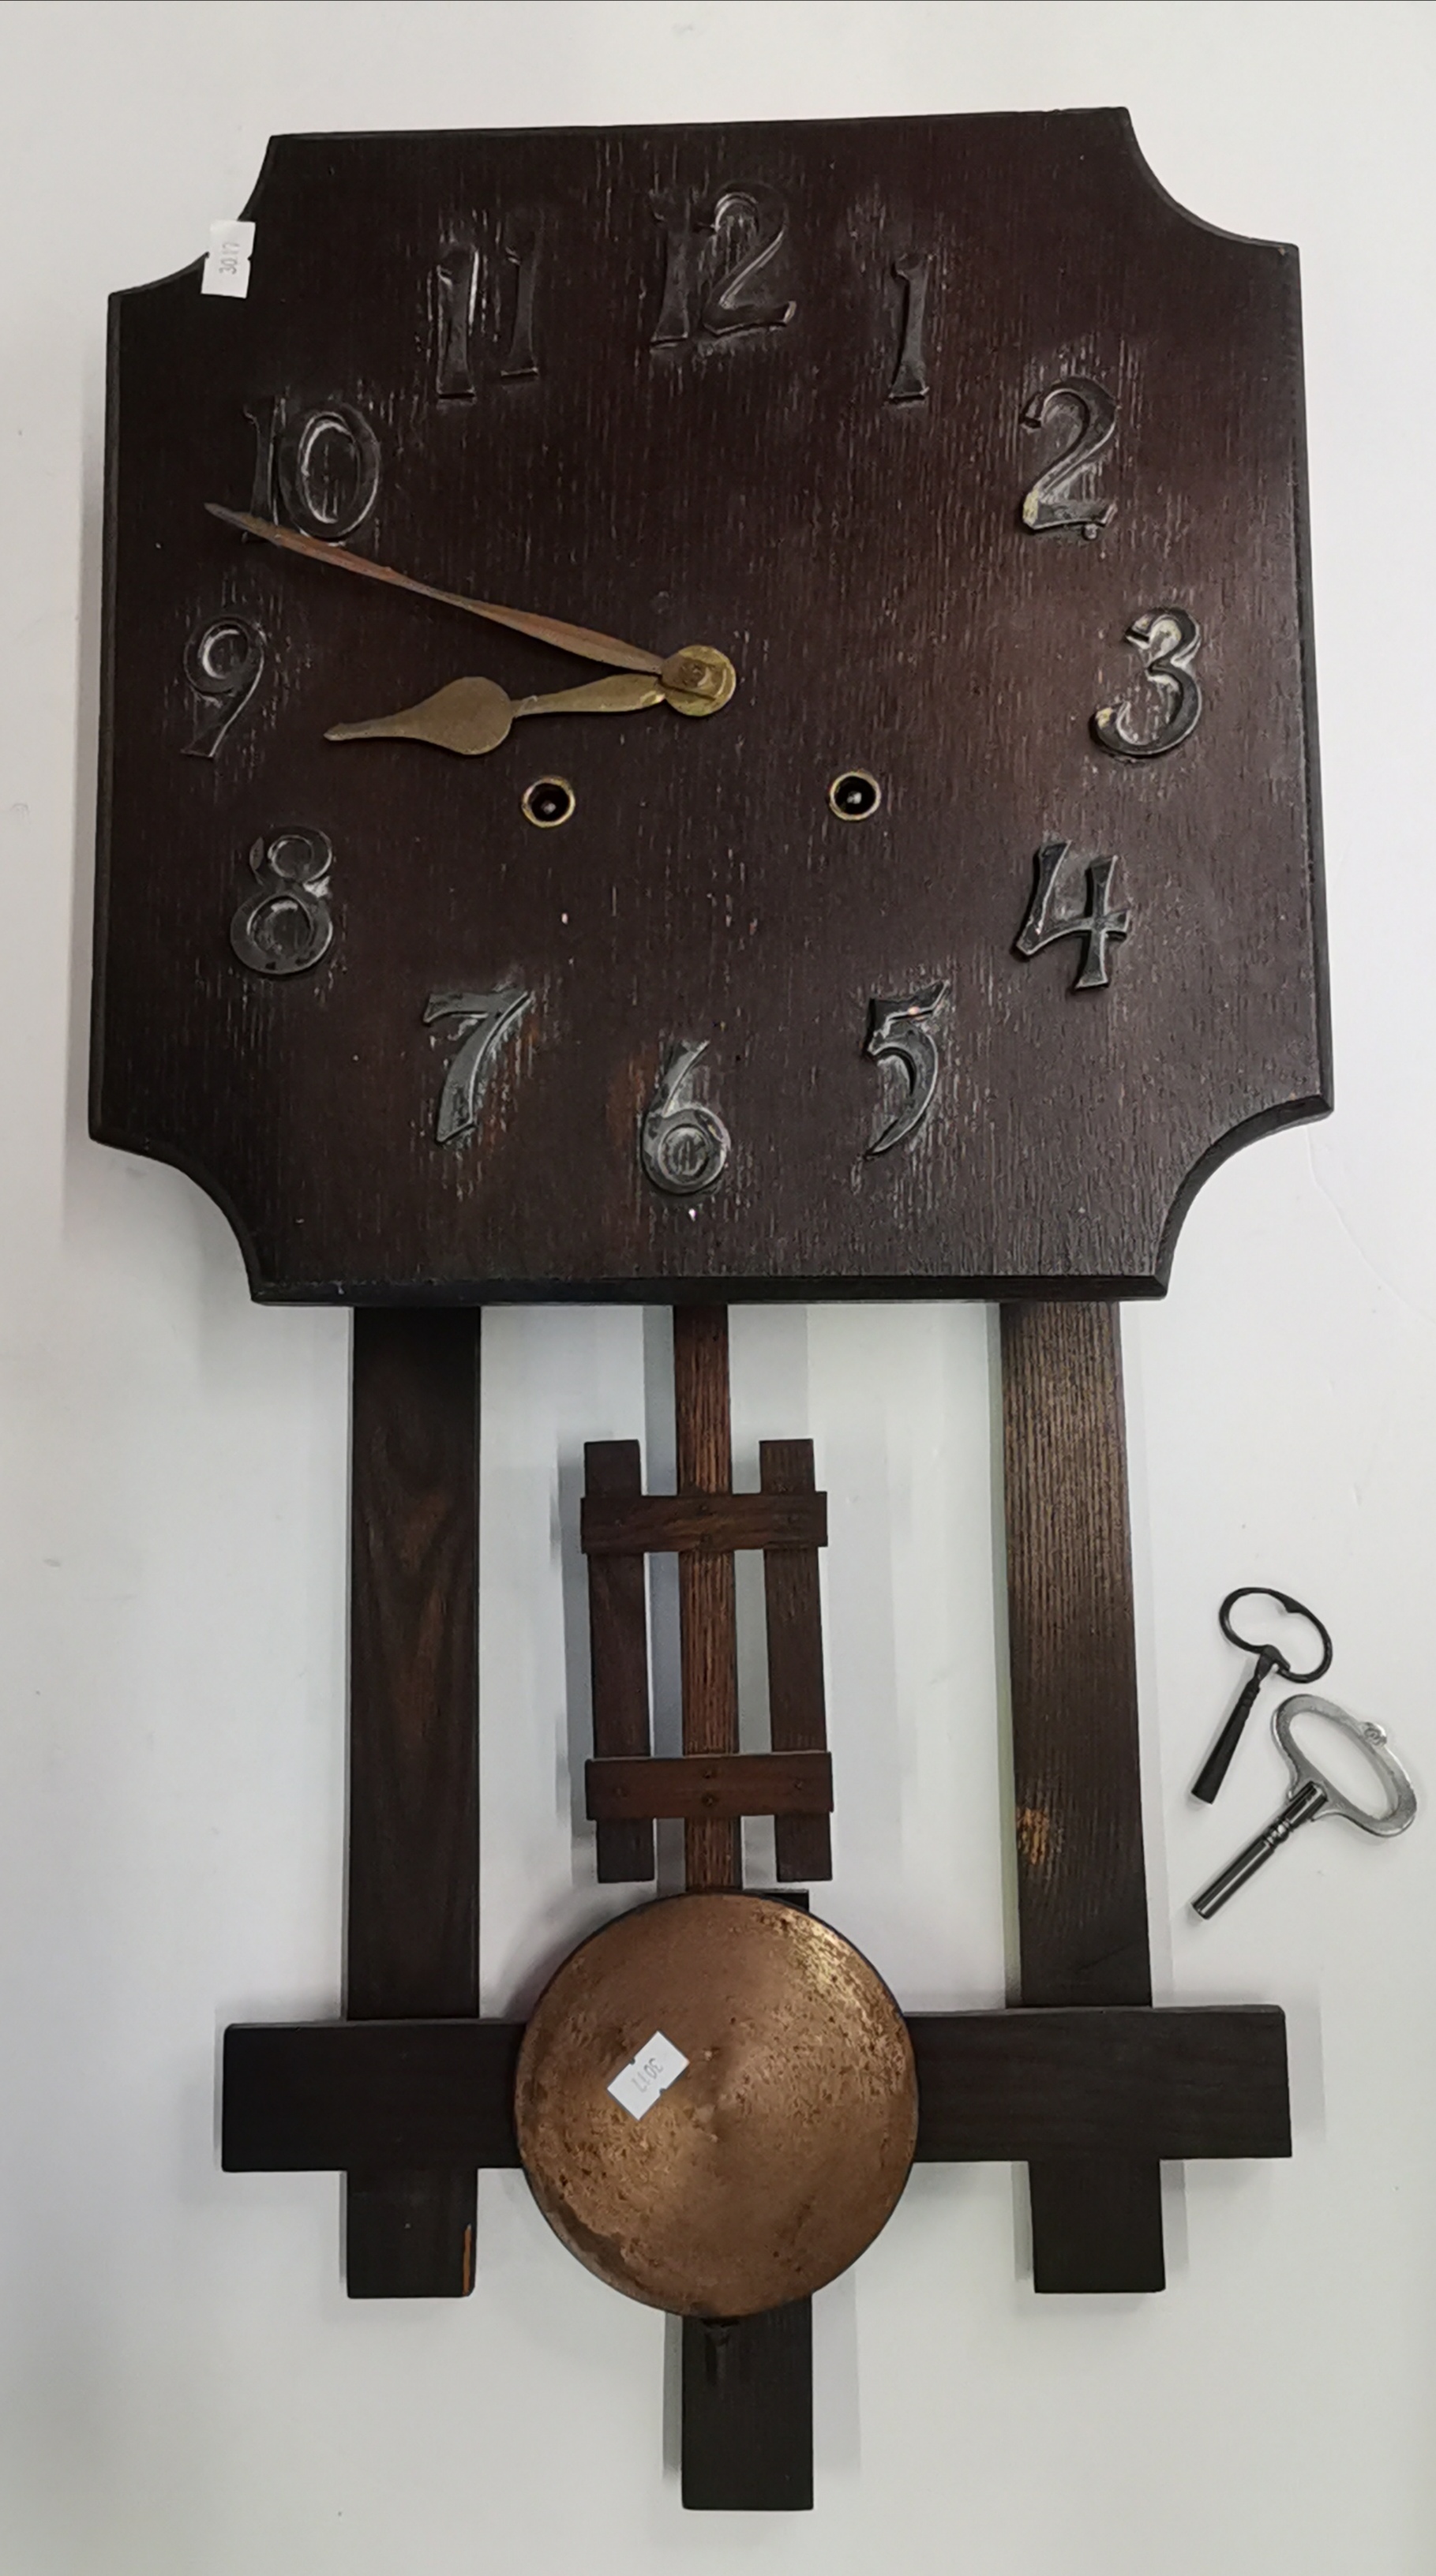 An Arts and Crafts style oak wall clock made by W.M Gilbert clock co.